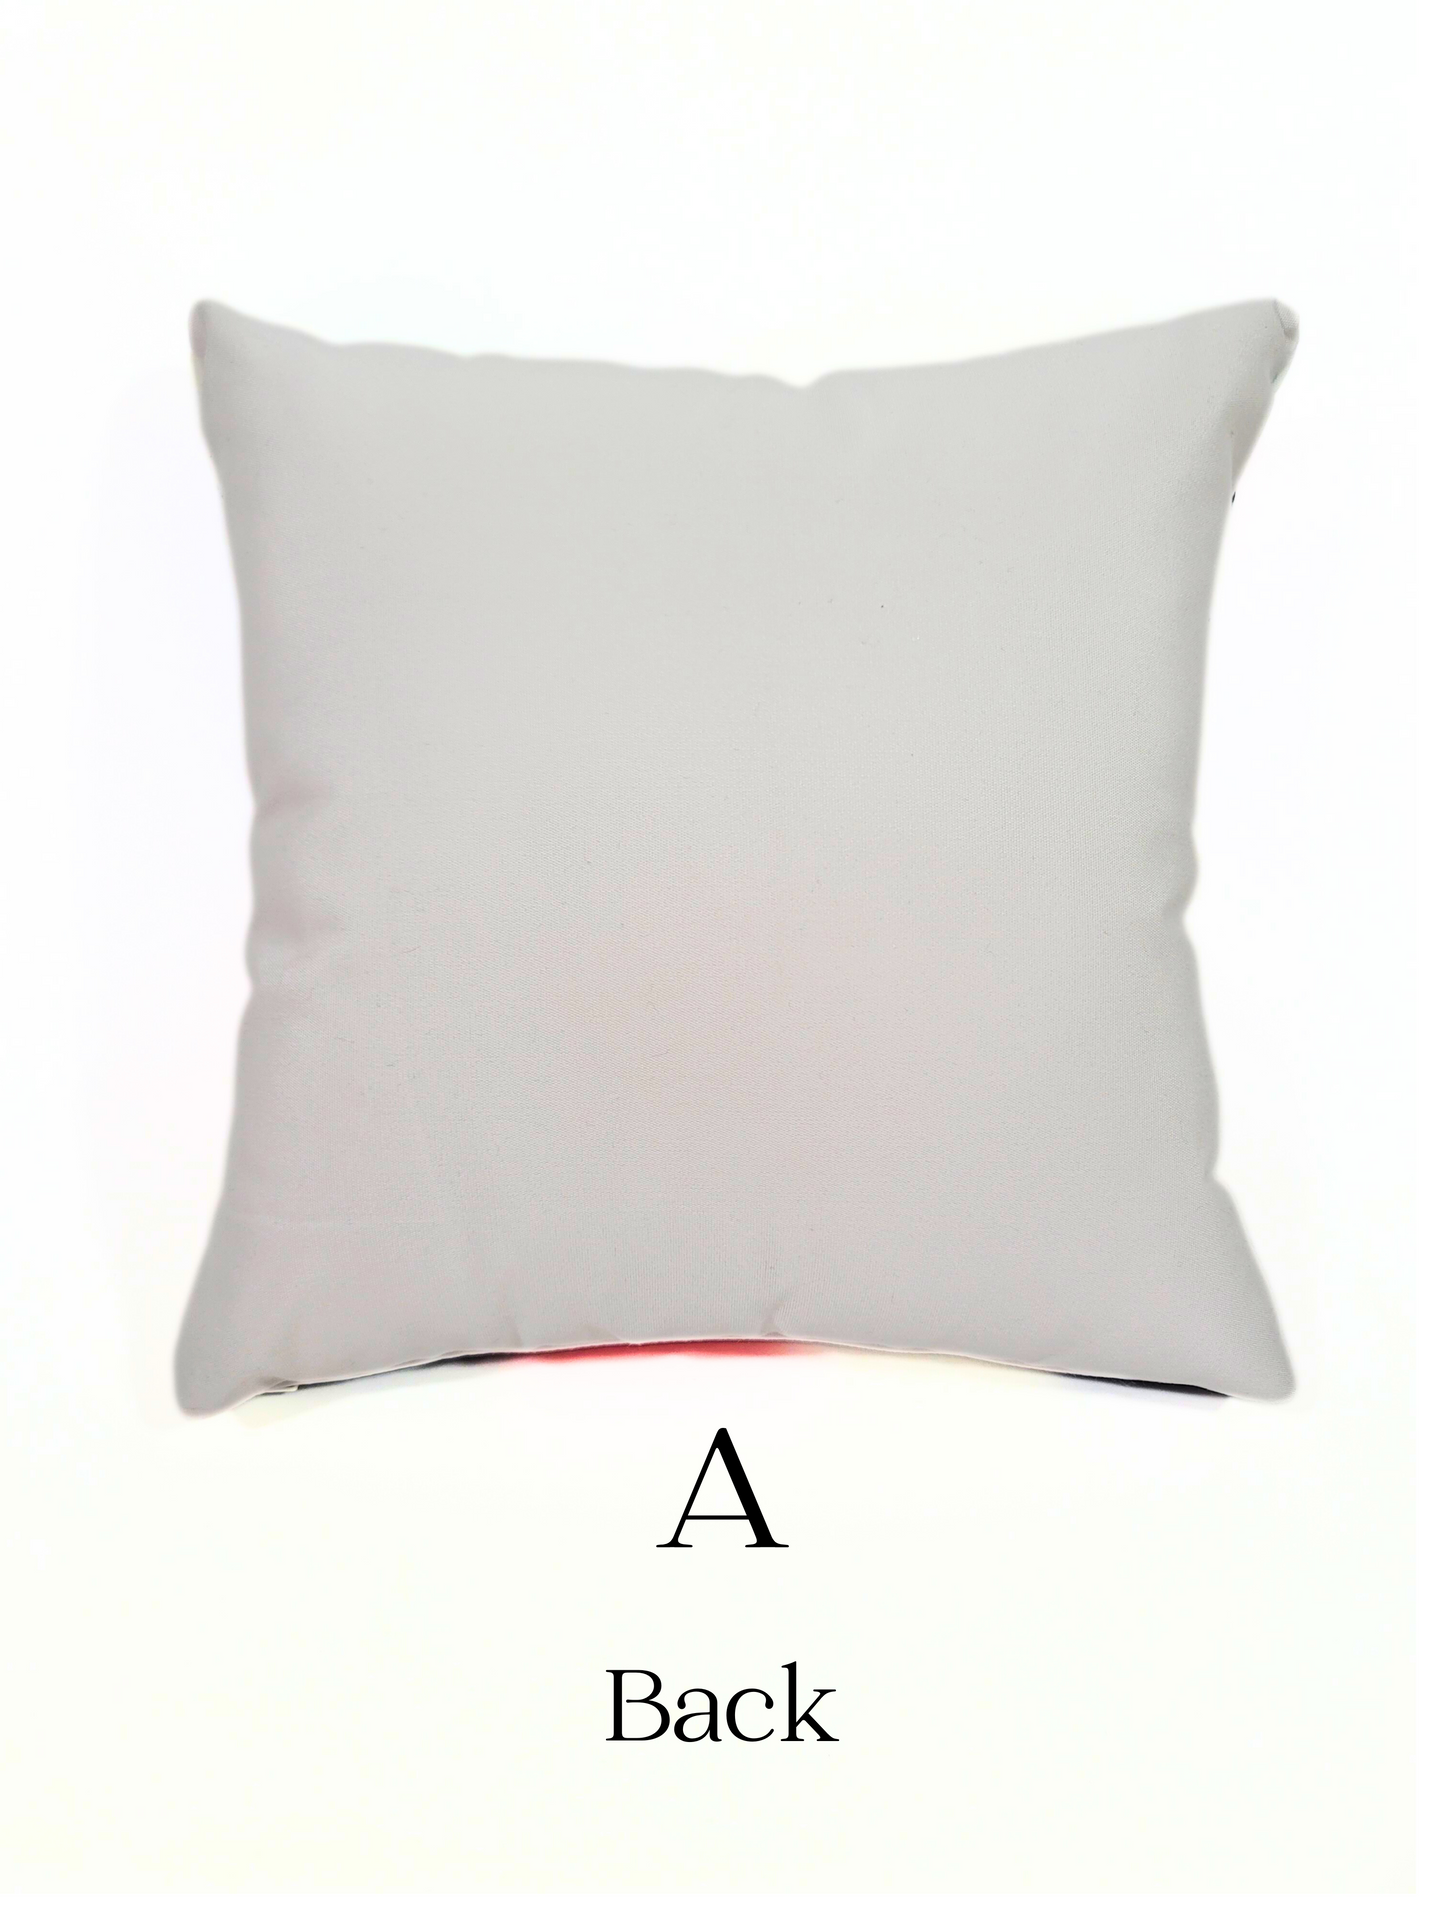 Mod Indoor/Outdoor Toss Pillow Cover backed with Sunbrella 'White Canvas'